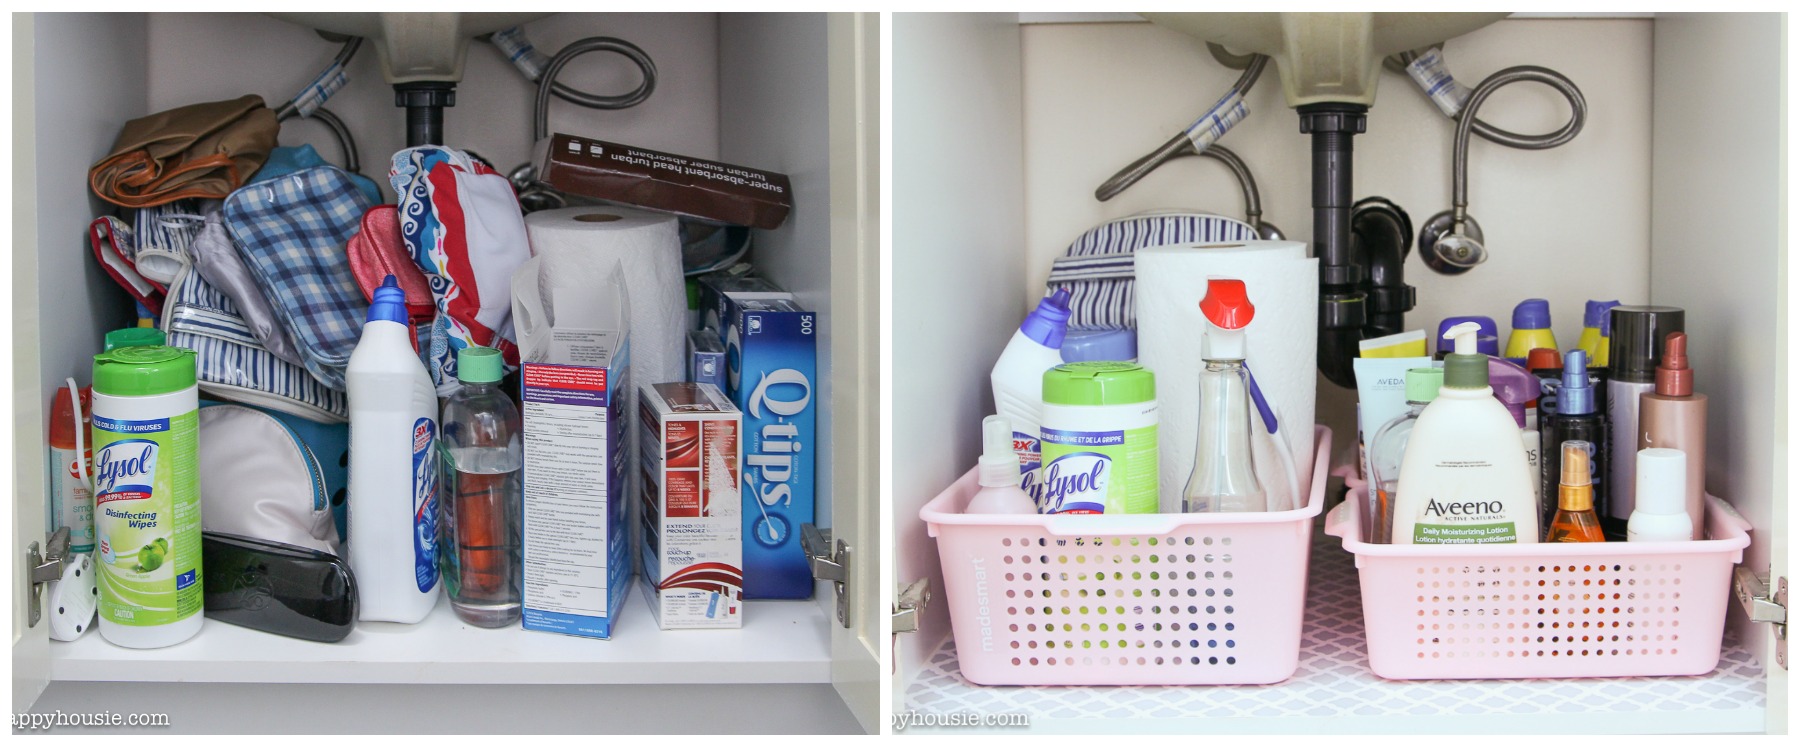 Put all of your bathroom cleaning supplies in one container